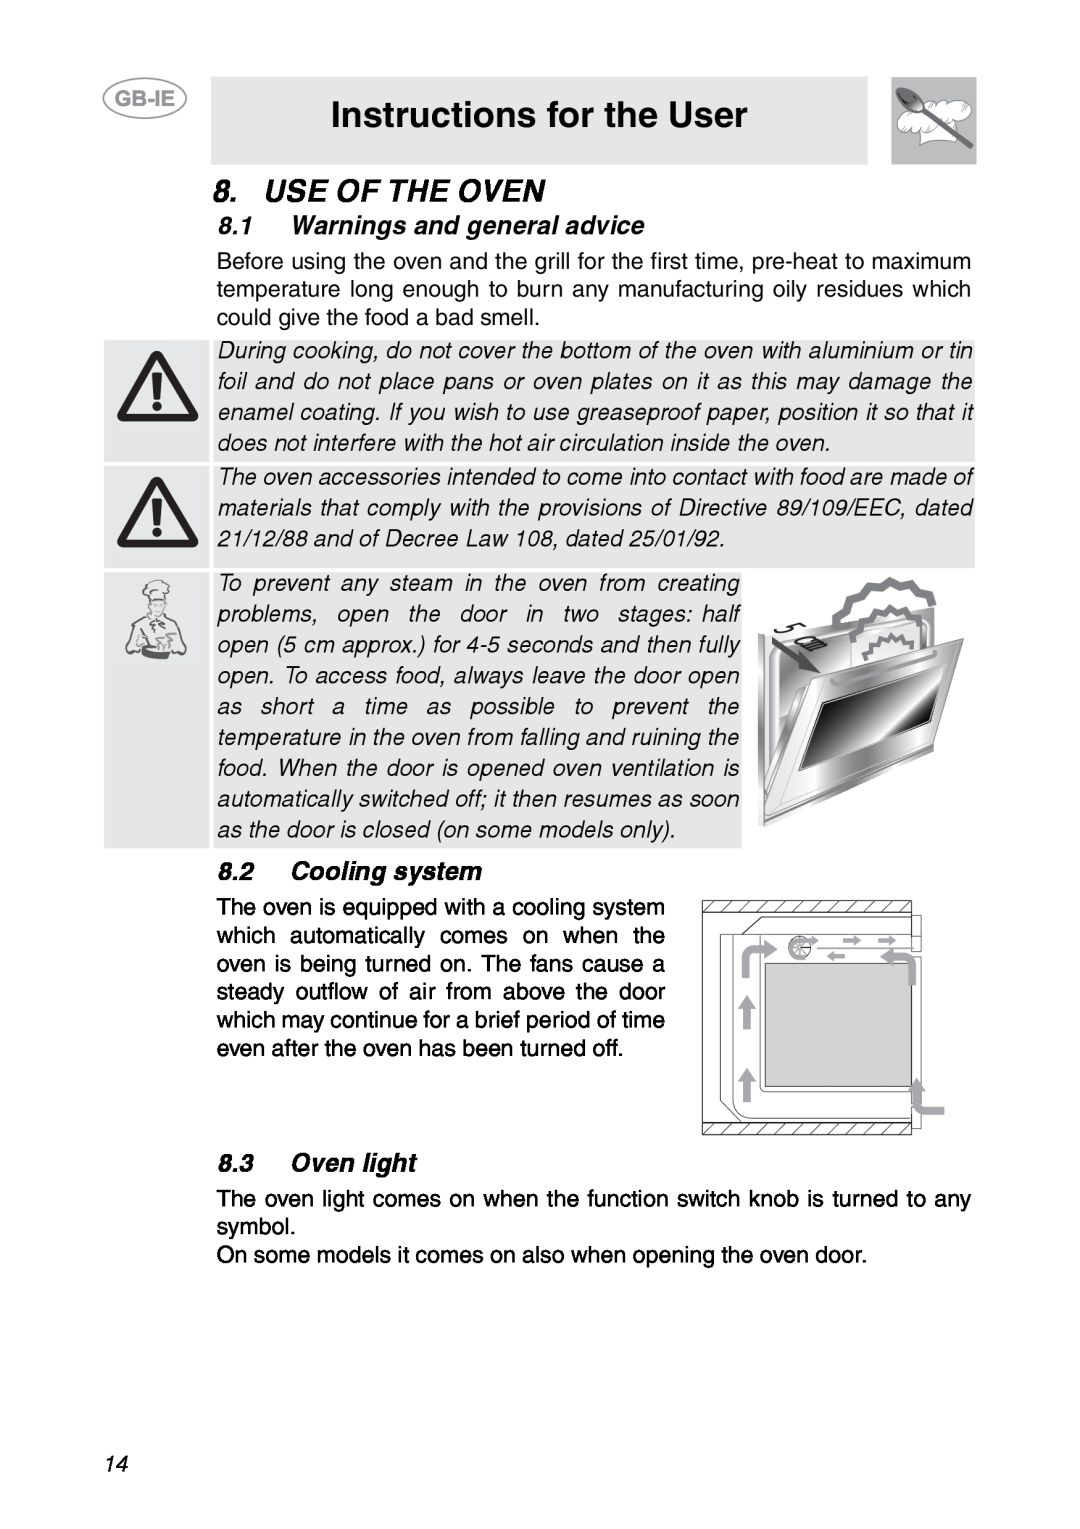 Smeg SCDK398X Use Of The Oven, Instructions for the User, 8.1Warnings and general advice, 8.2Cooling system, 8.3Oven light 